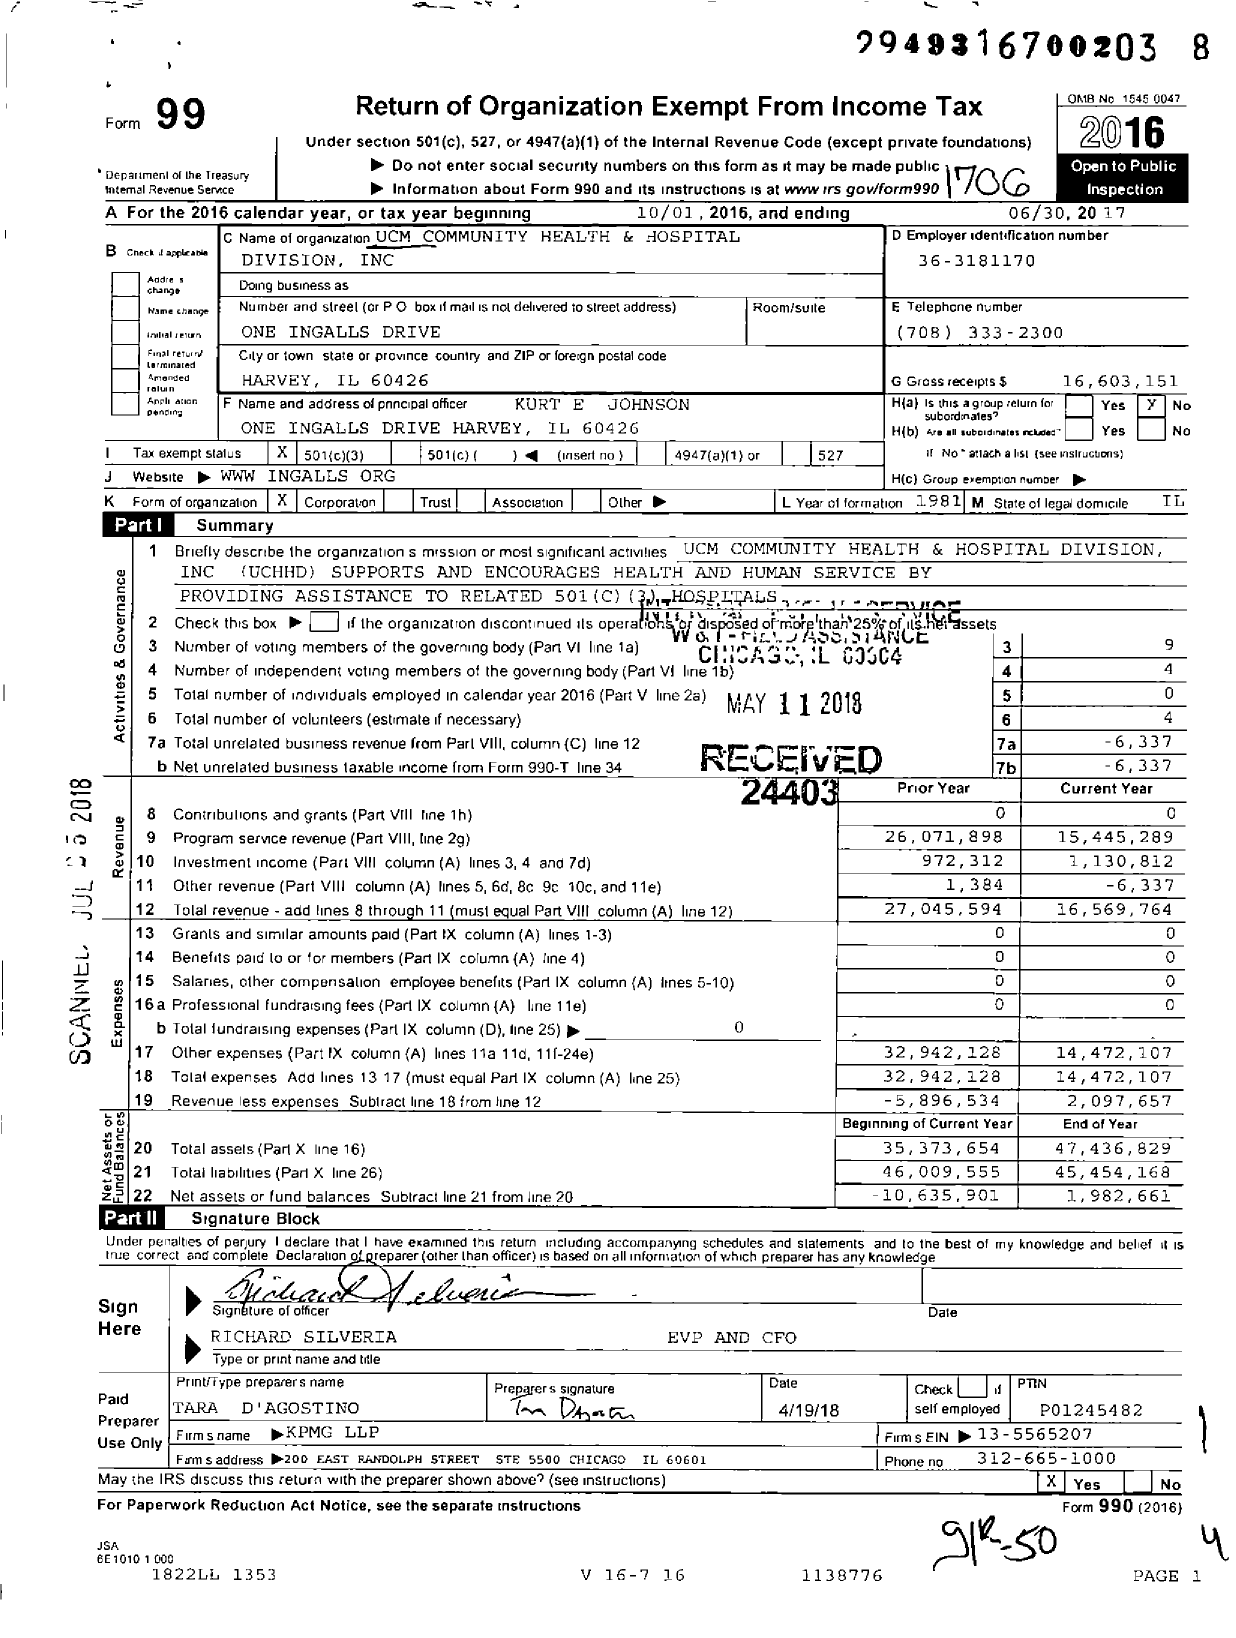 Image of first page of 2016 Form 990 for UCM Community Health and Hospital Division